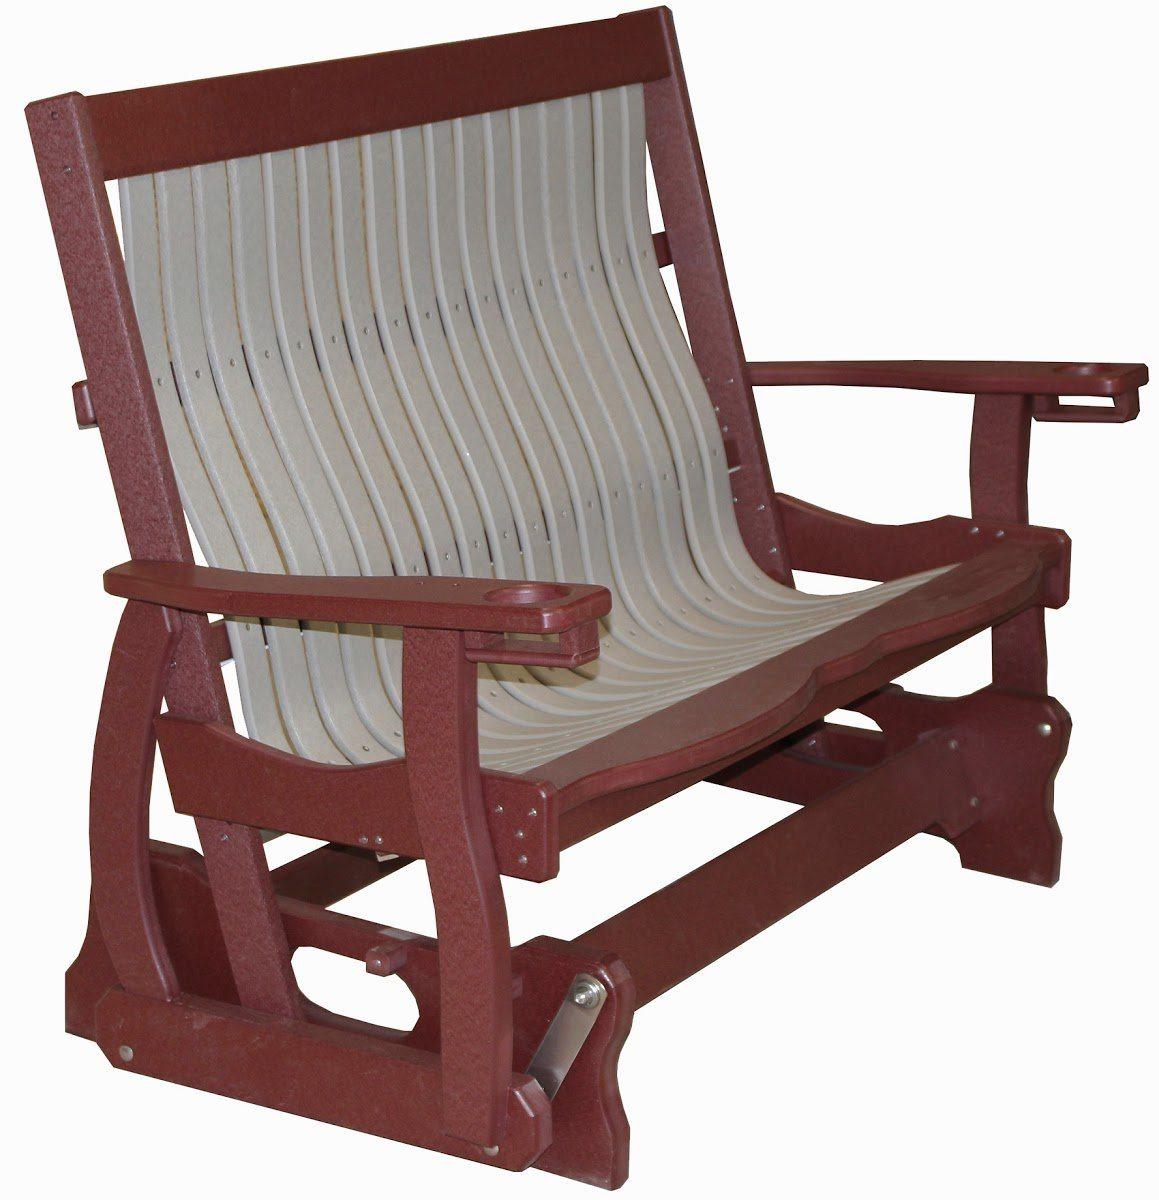 Mission Style Glider Bench Outdoor Furniture Meadowview 